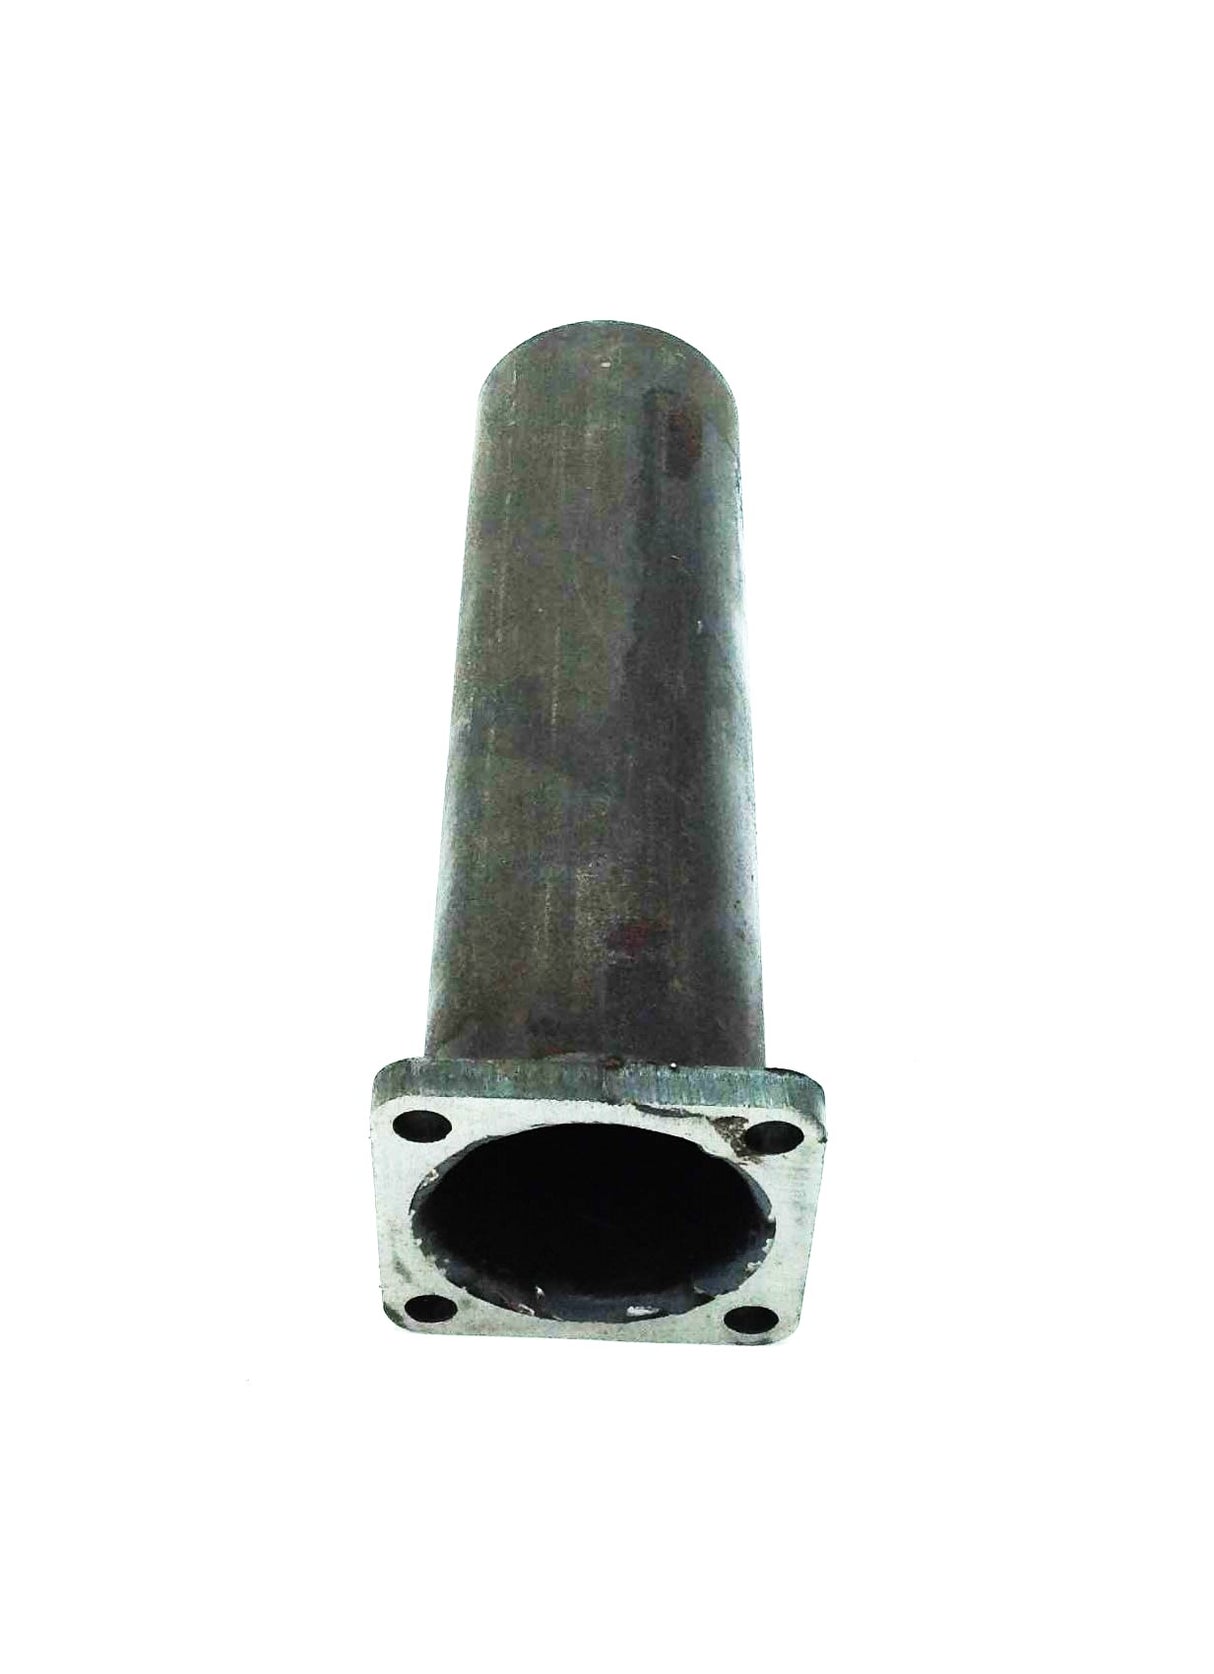 CUMMINS EMISSION SOLUTIONS ­-­ 3917223 ­-­ EXHAUST OUTLET PIPE/TAILPIPE  STAINLESS STEEL